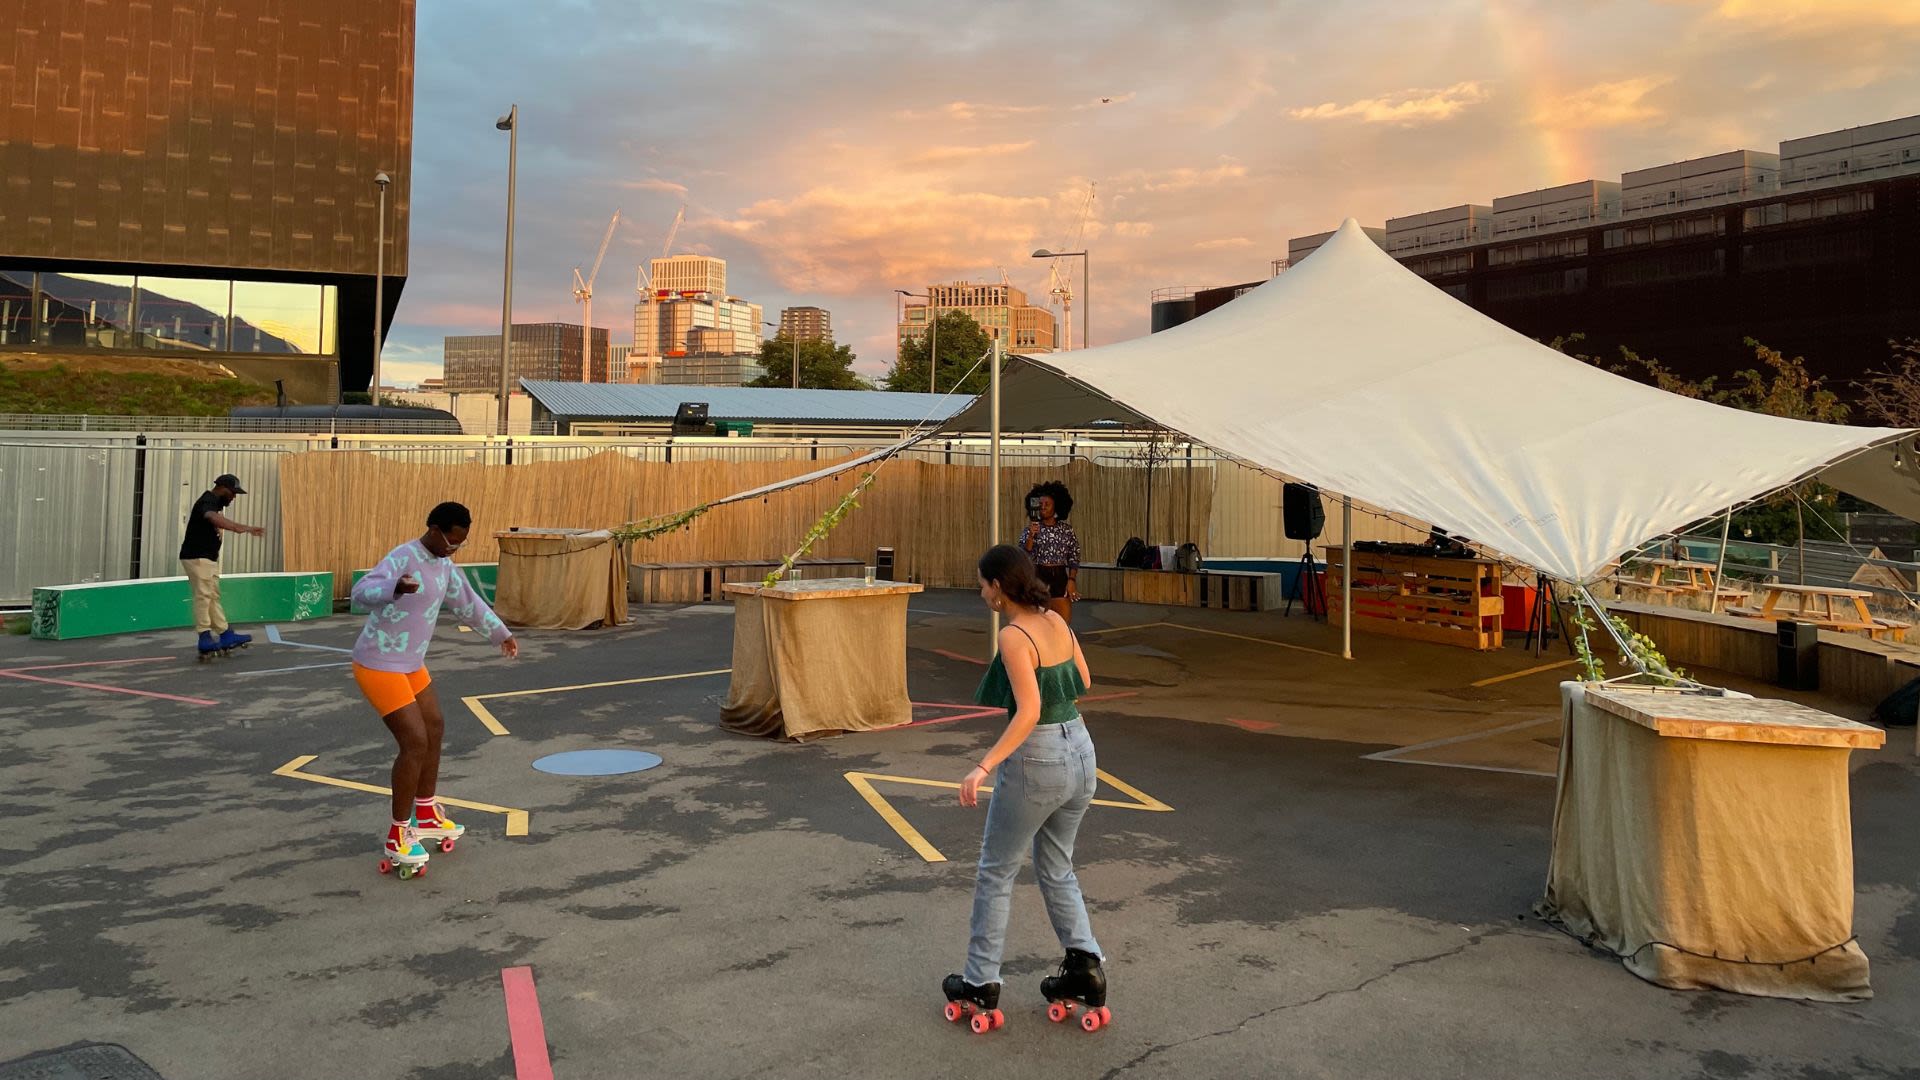 People roller skating on a rooftop on a summer's evening